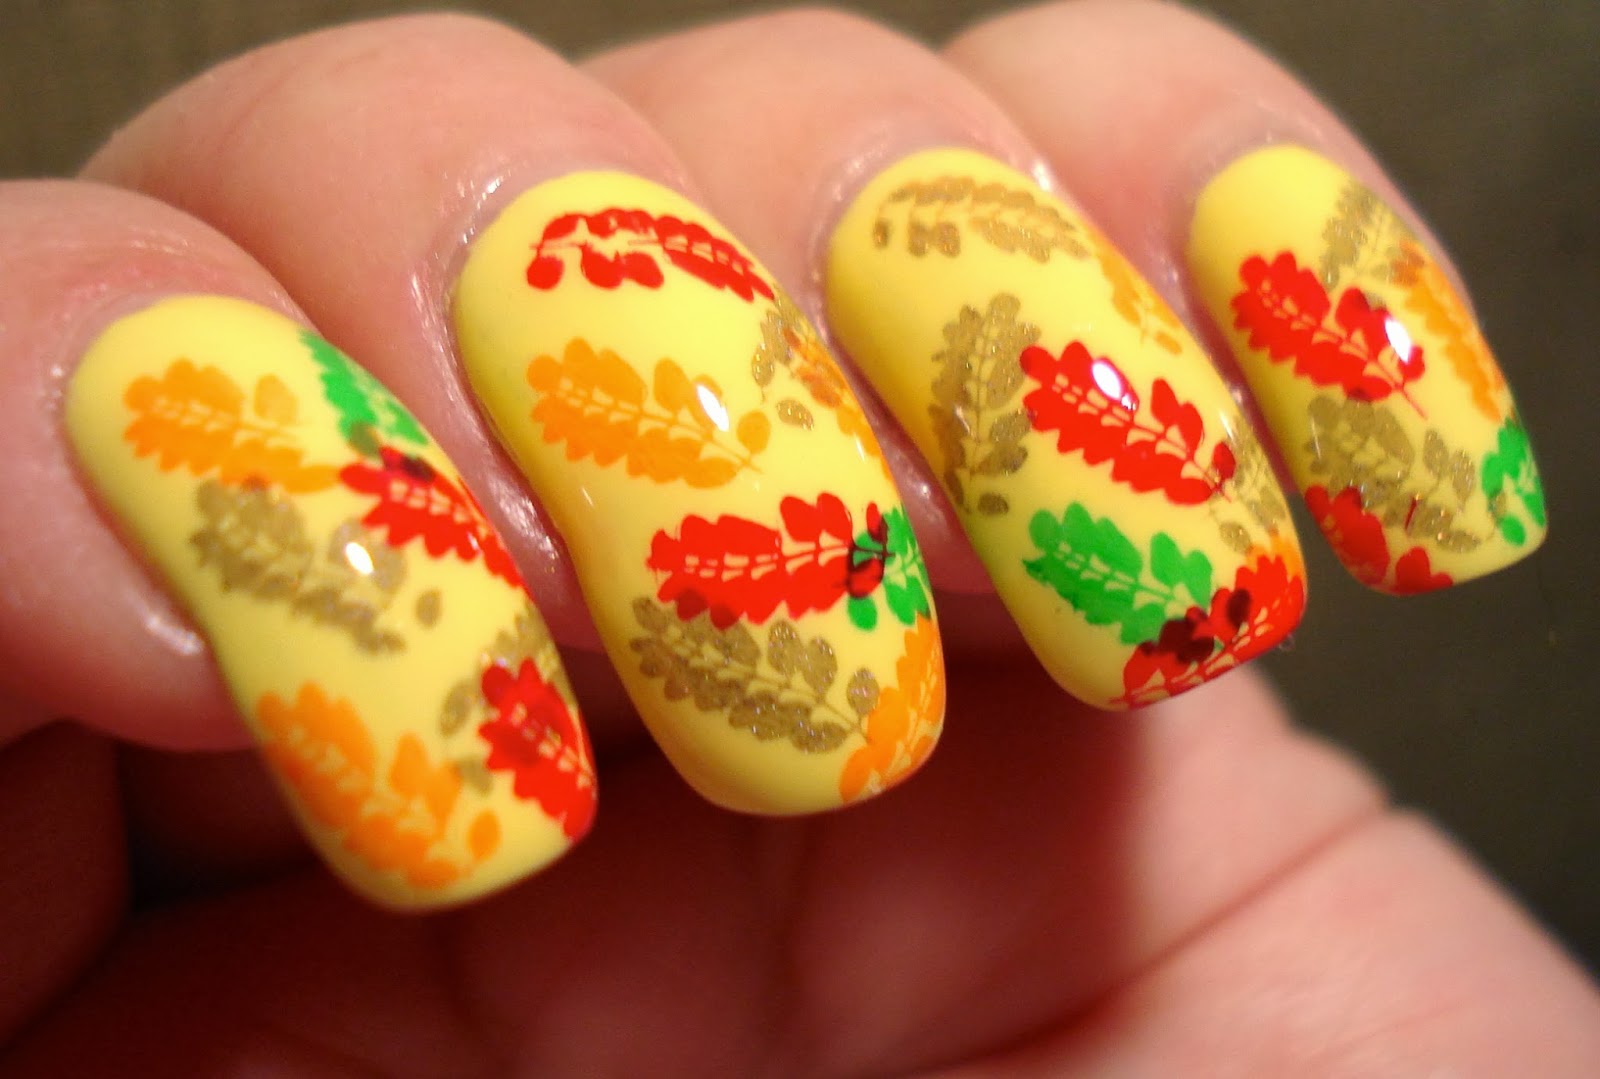 4. "Autumn-Inspired Nail Art: Leaves, Pumpkins, and More!" - wide 6